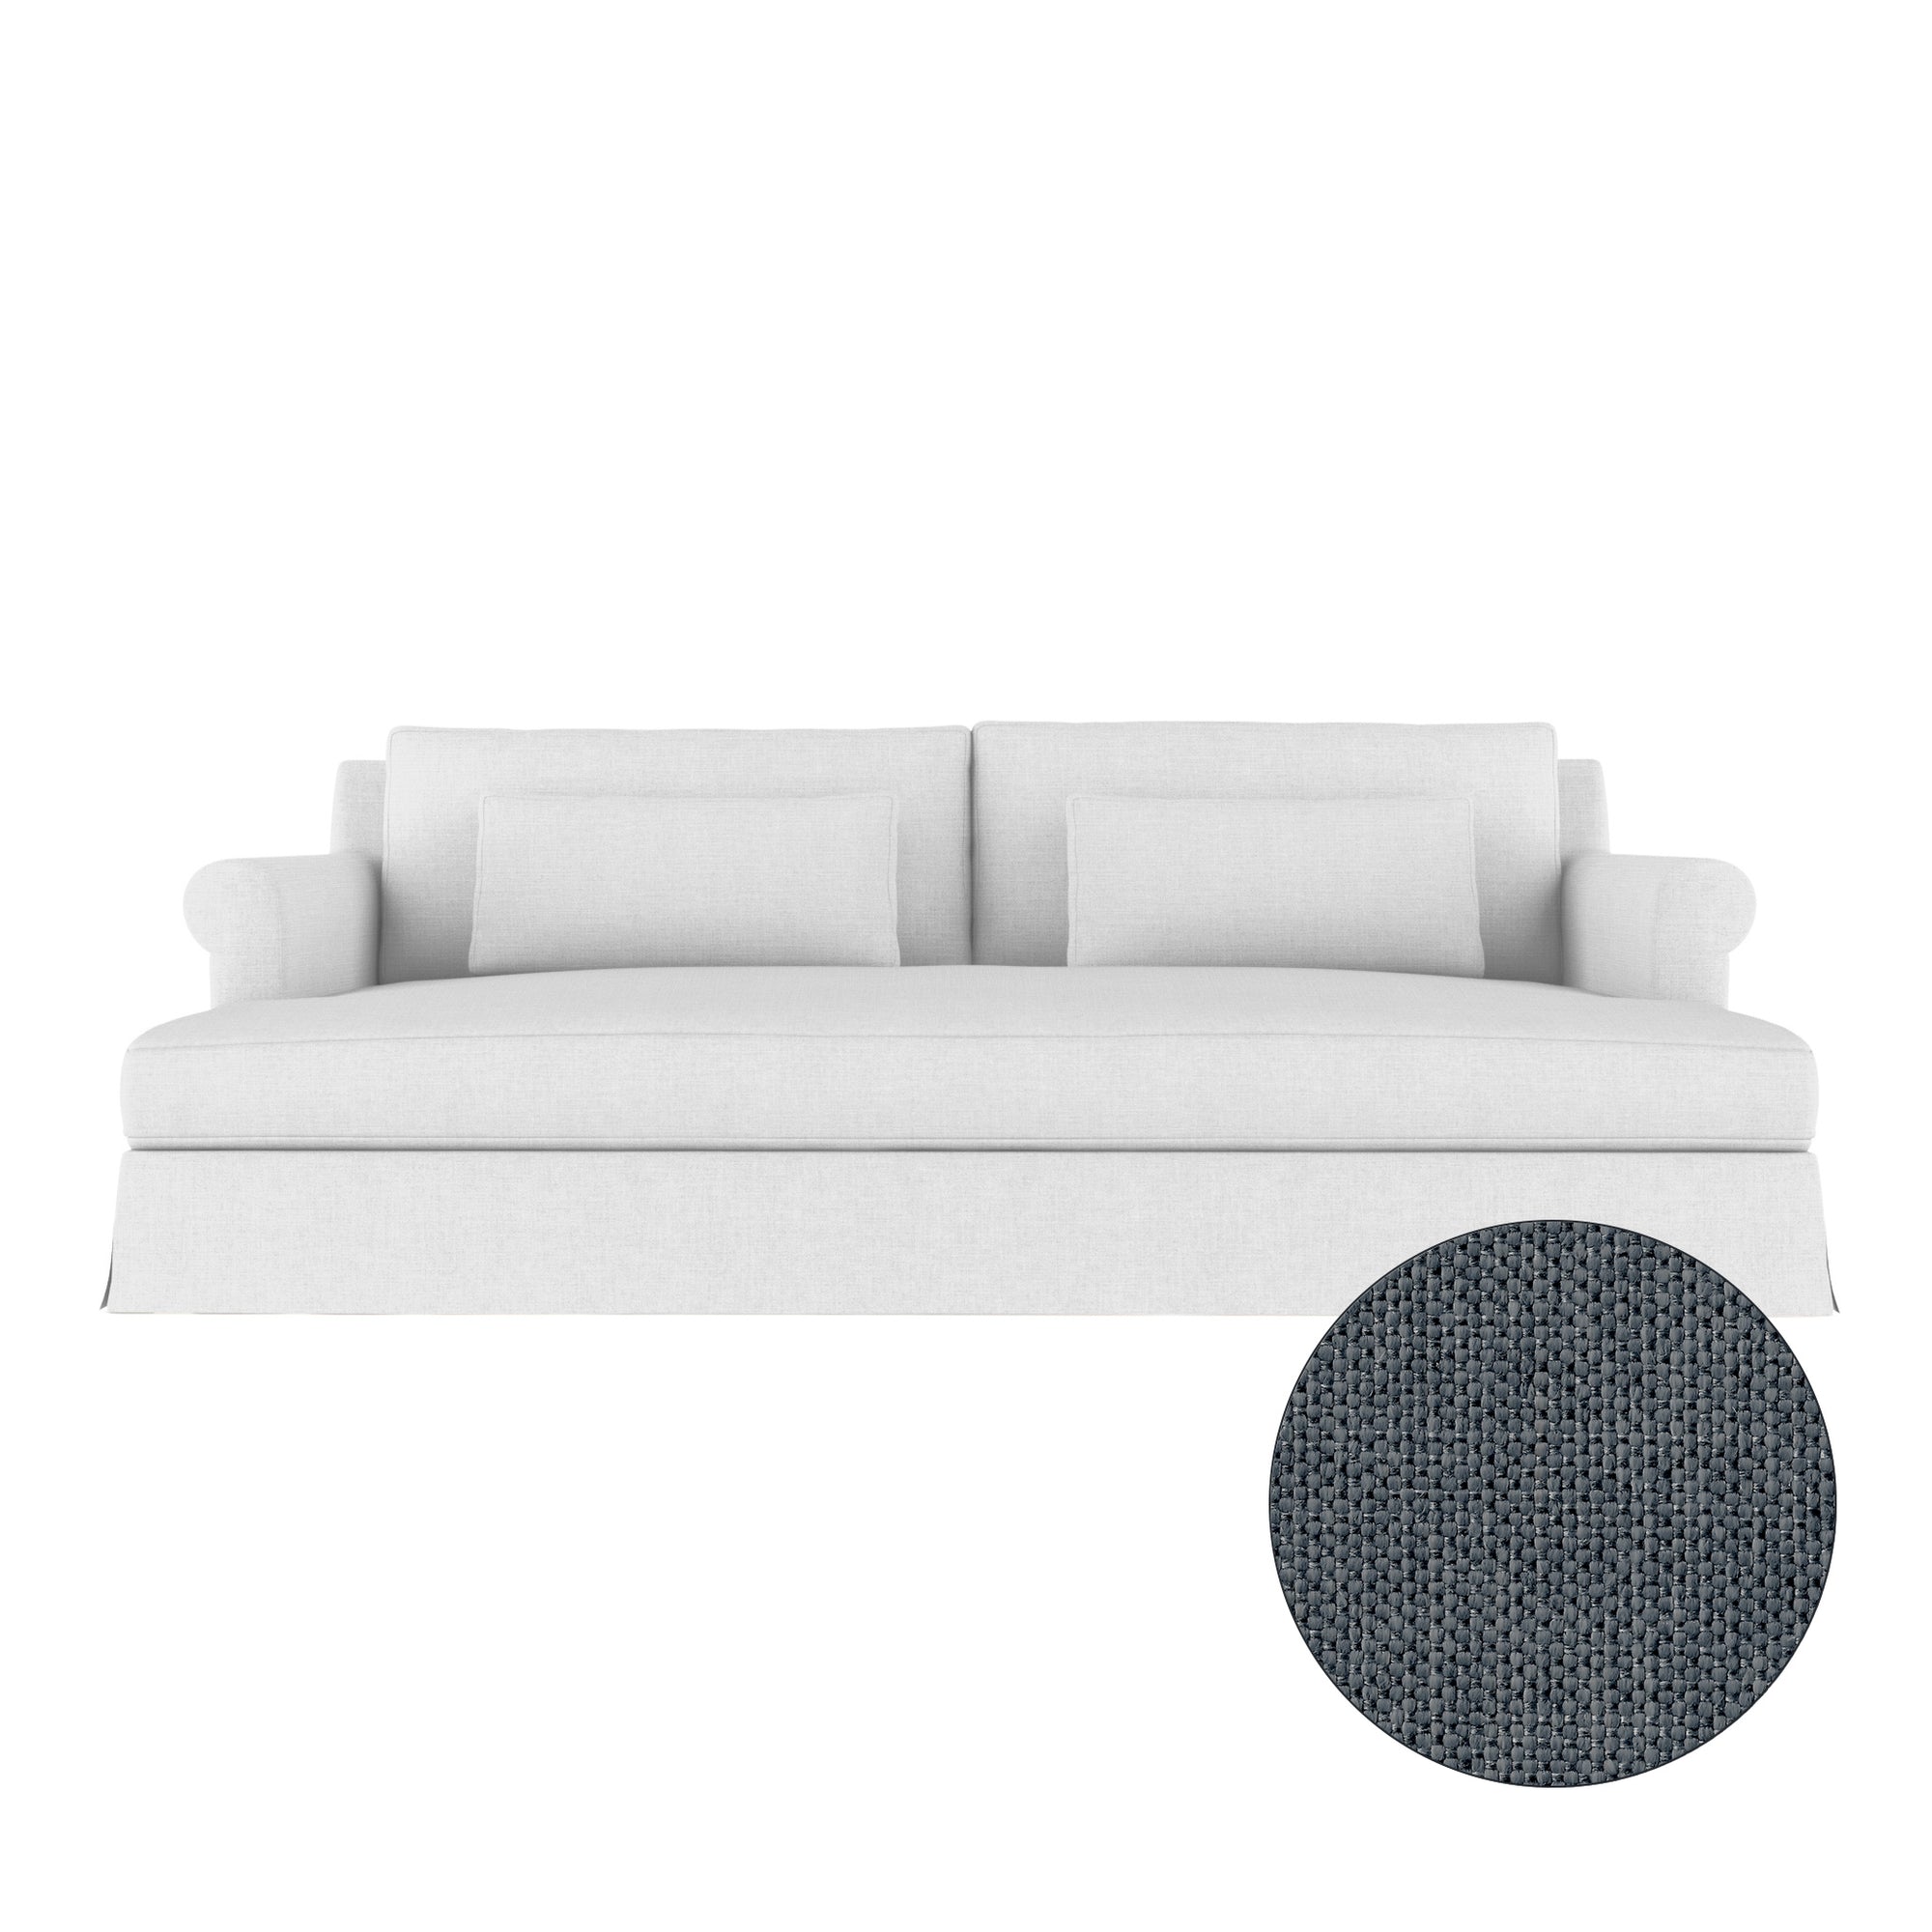 Ludlow Daybed - Bluebell Pebble Weave Linen